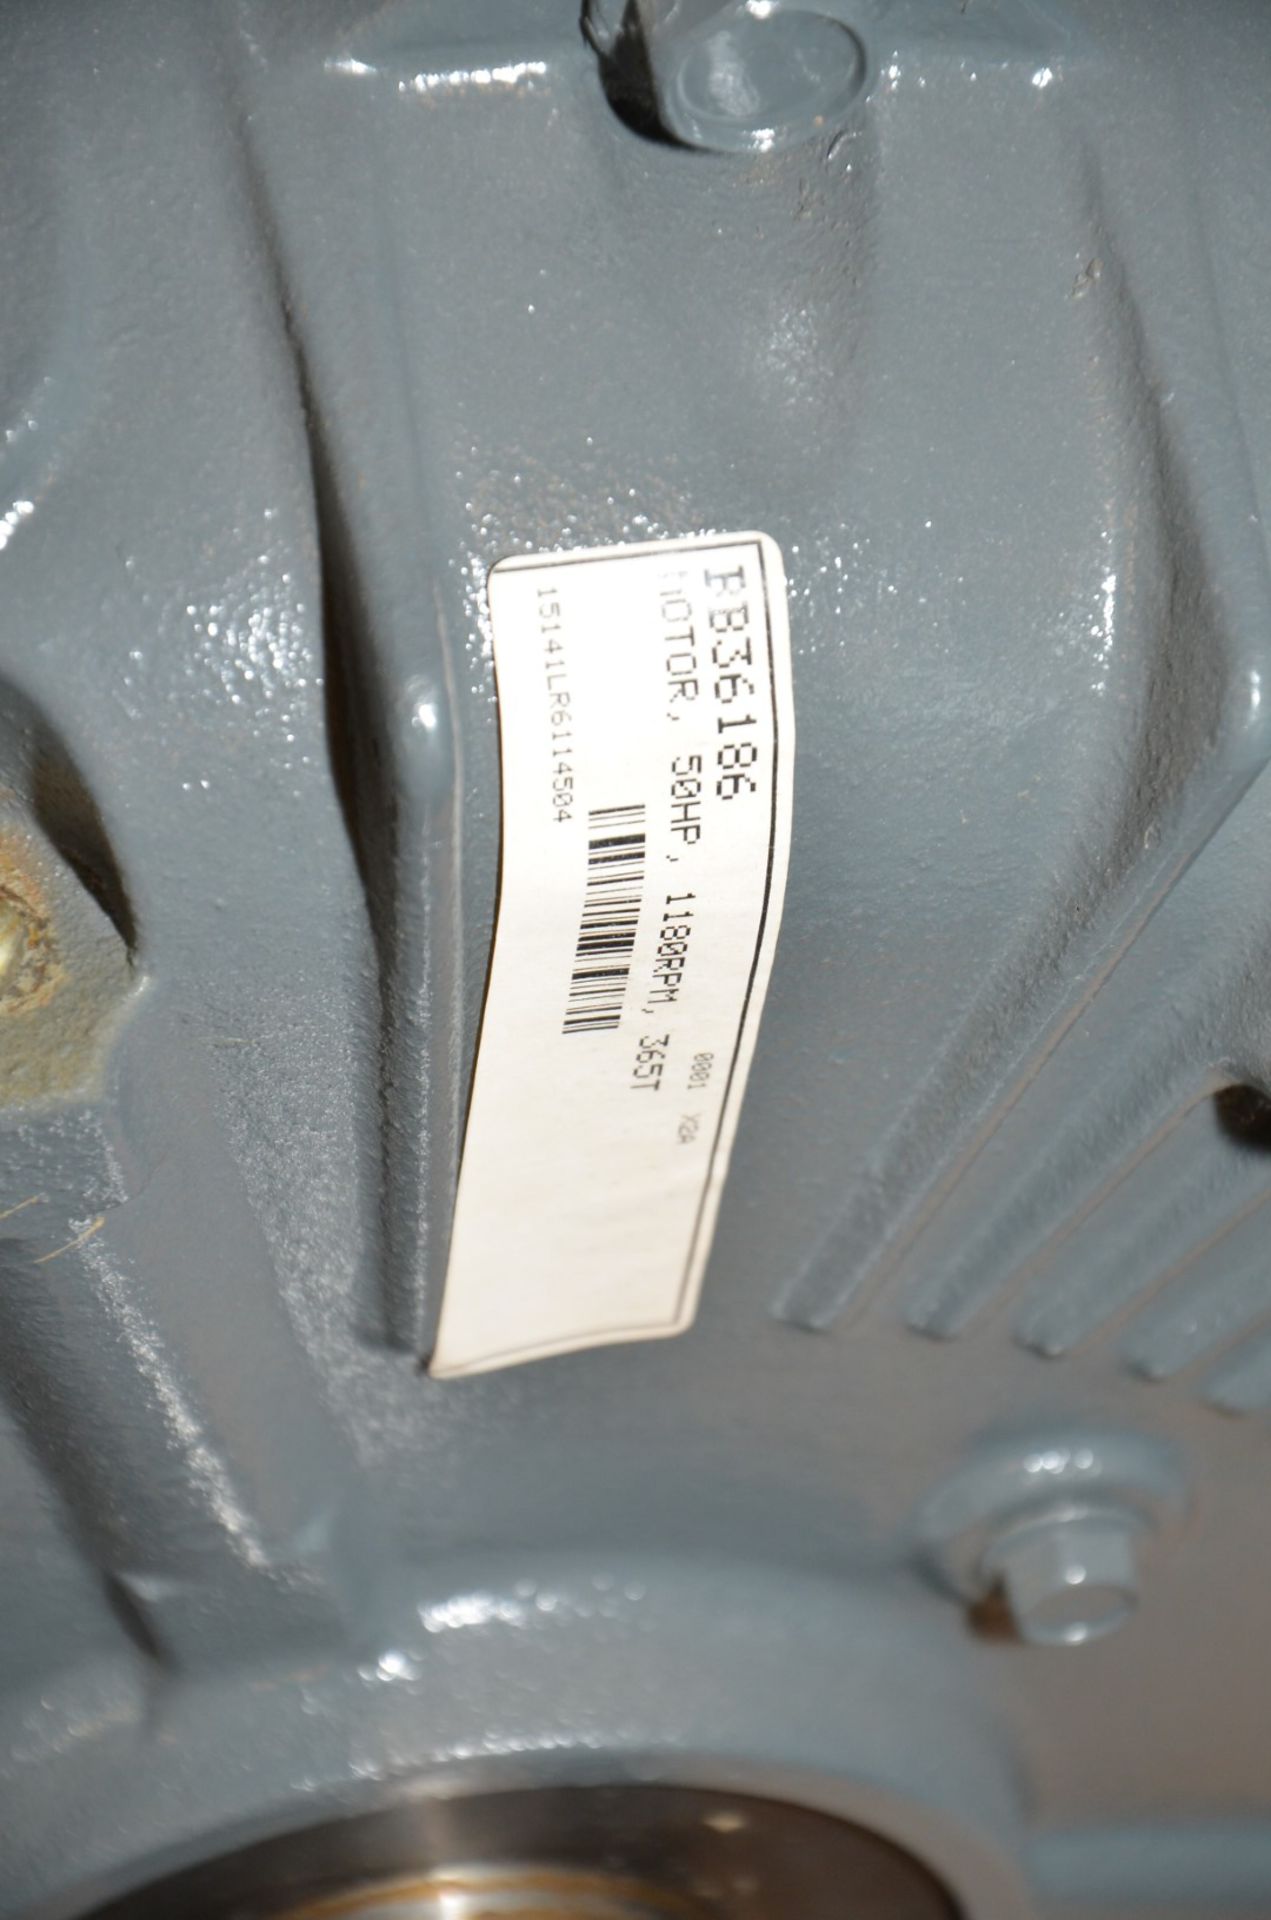 WORLDWIDE 50 HP 1180 RPM ELECTRIC MOTOR [RIGGING FEE FOR LOT #1554 - $50 USD PLUS APPLICABLE TAXES] - Image 3 of 3